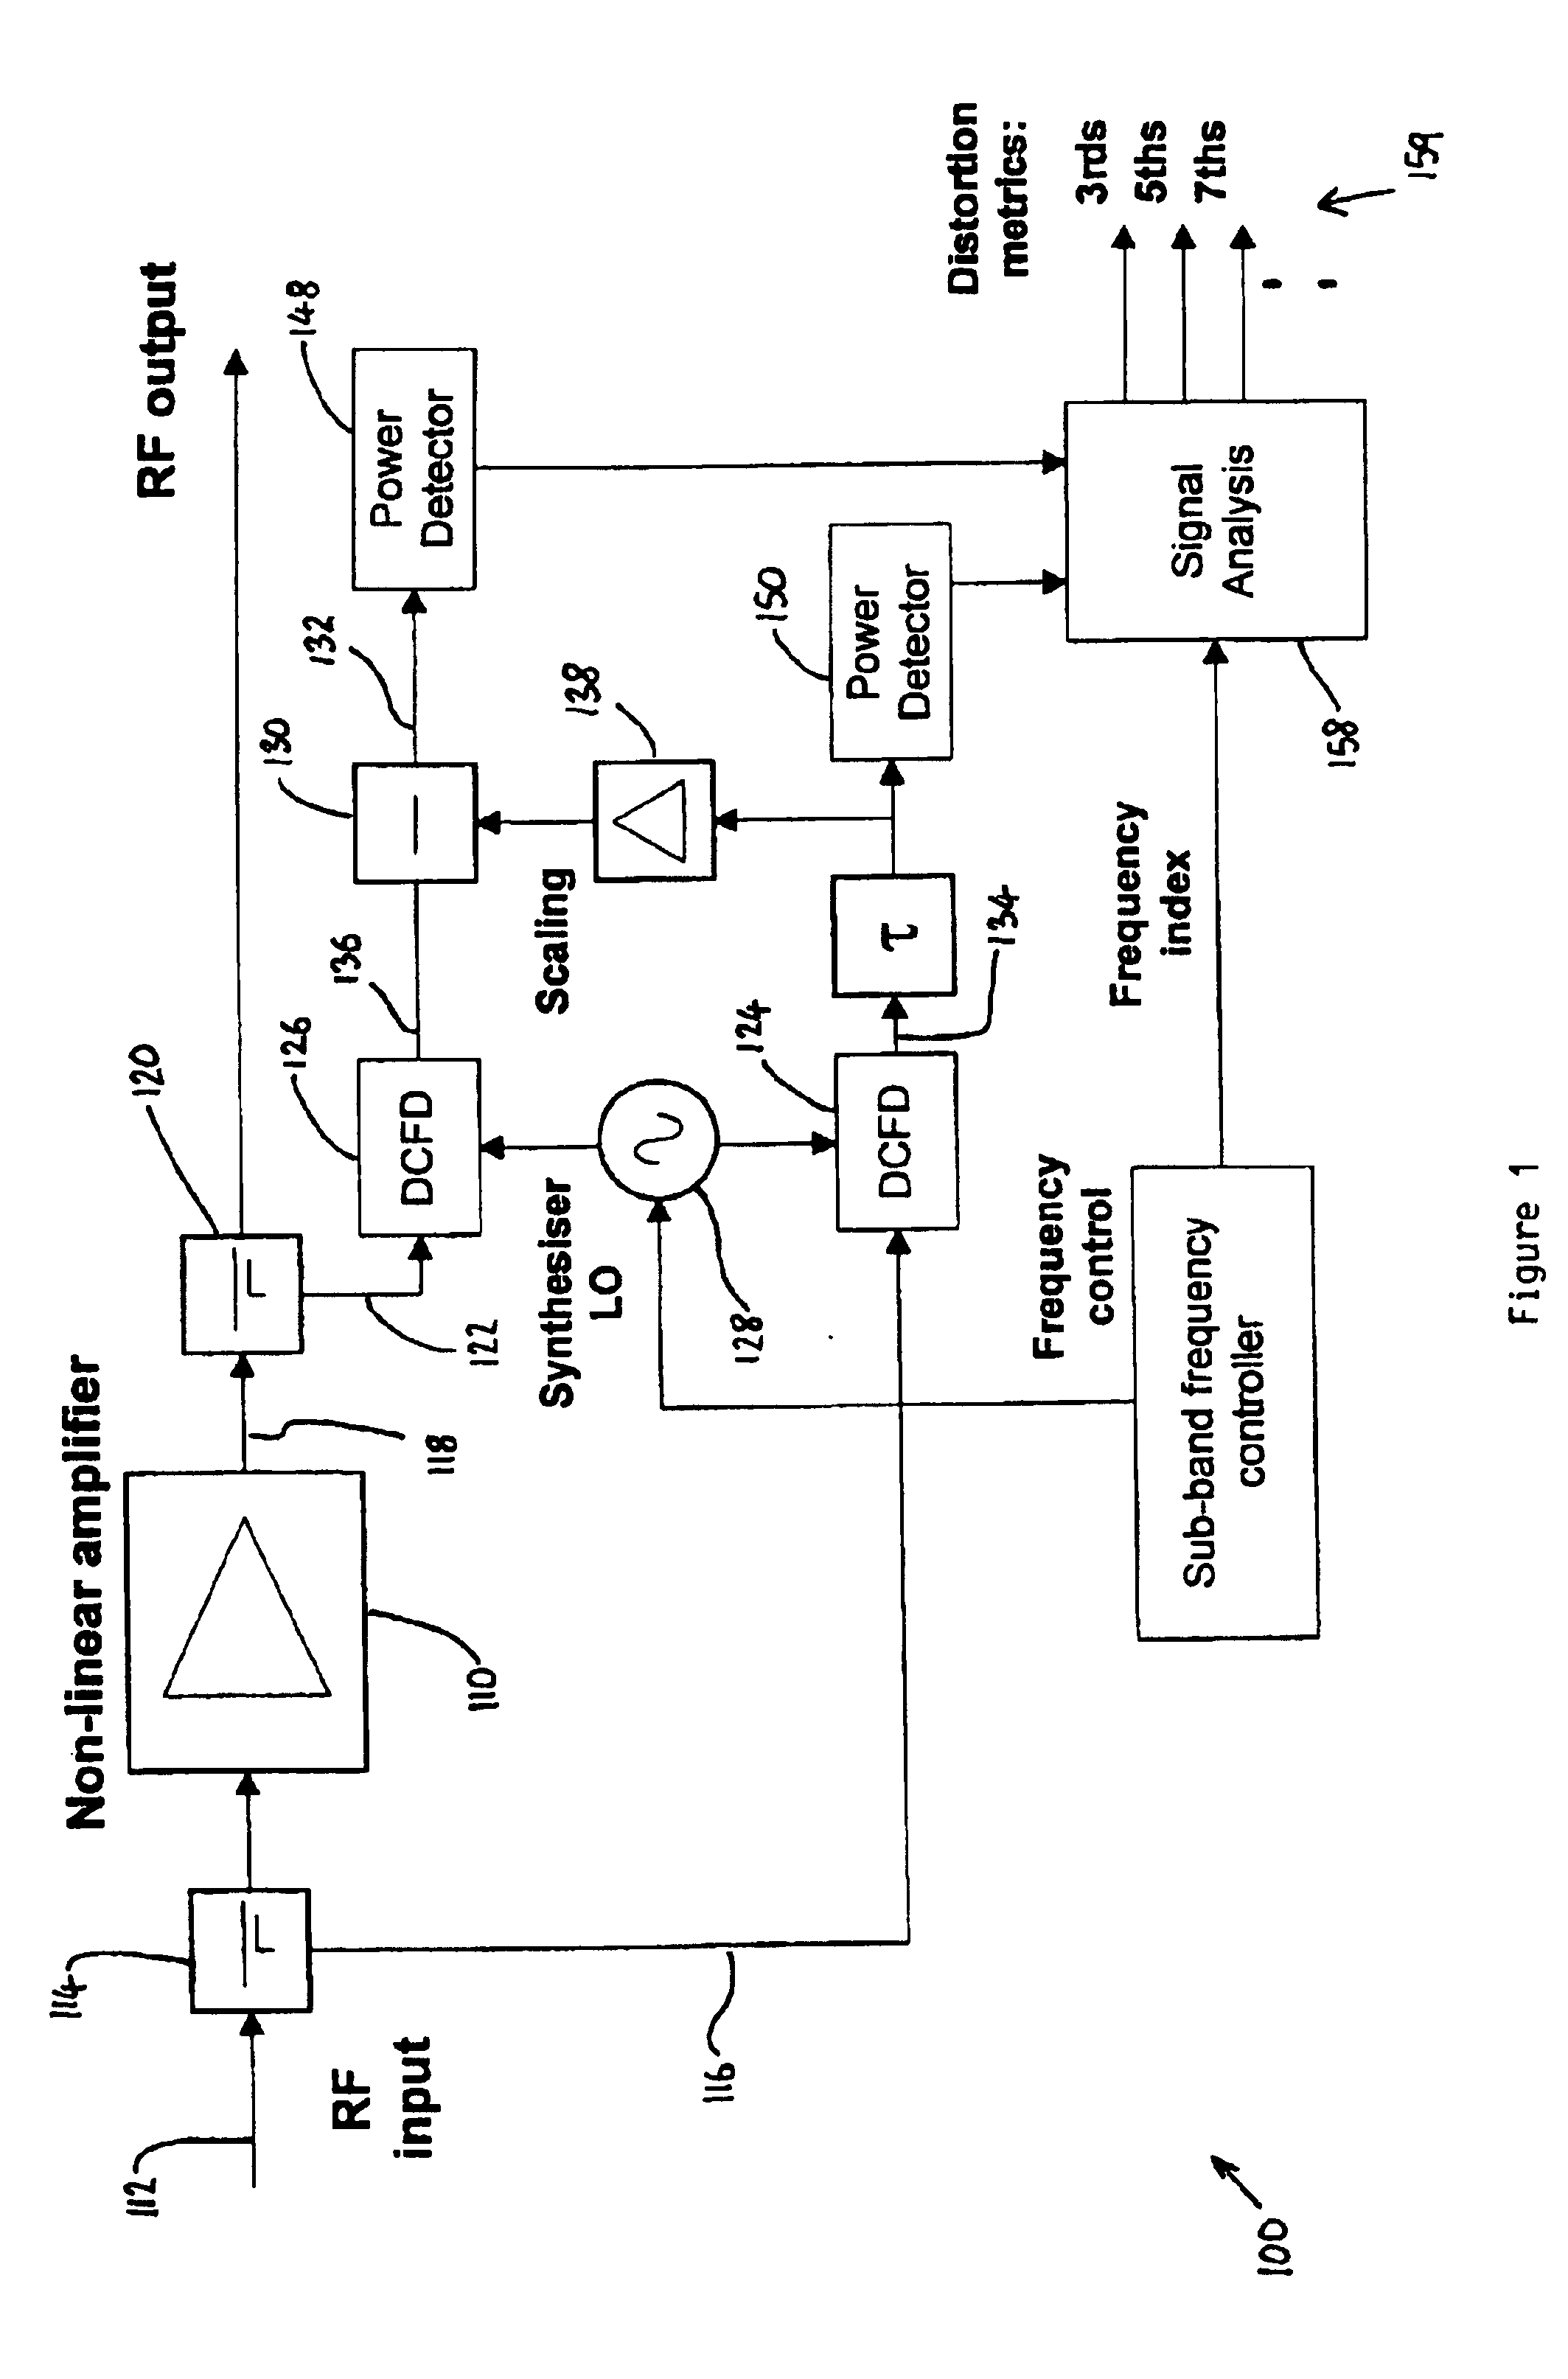 Distortion detection for a power amplifier